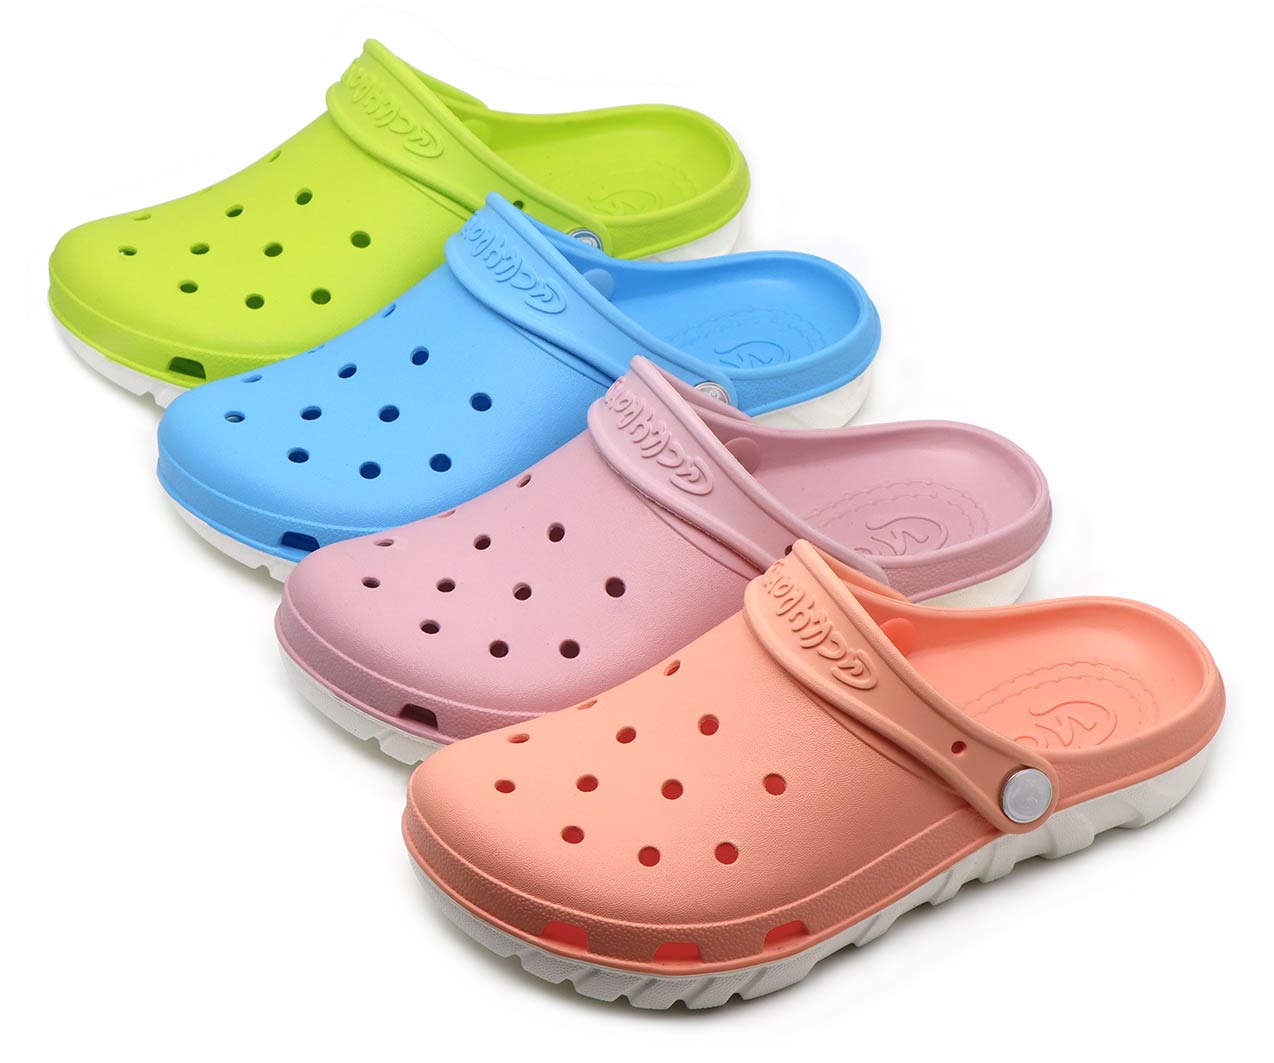 Сабо lucky land. ЭВА сабо Lucky Land. Тапки Lucky Land Crocs. Lucky Land Пантолеты женские 3200 w-FC-Eva. Сабо Lucky Land 39.